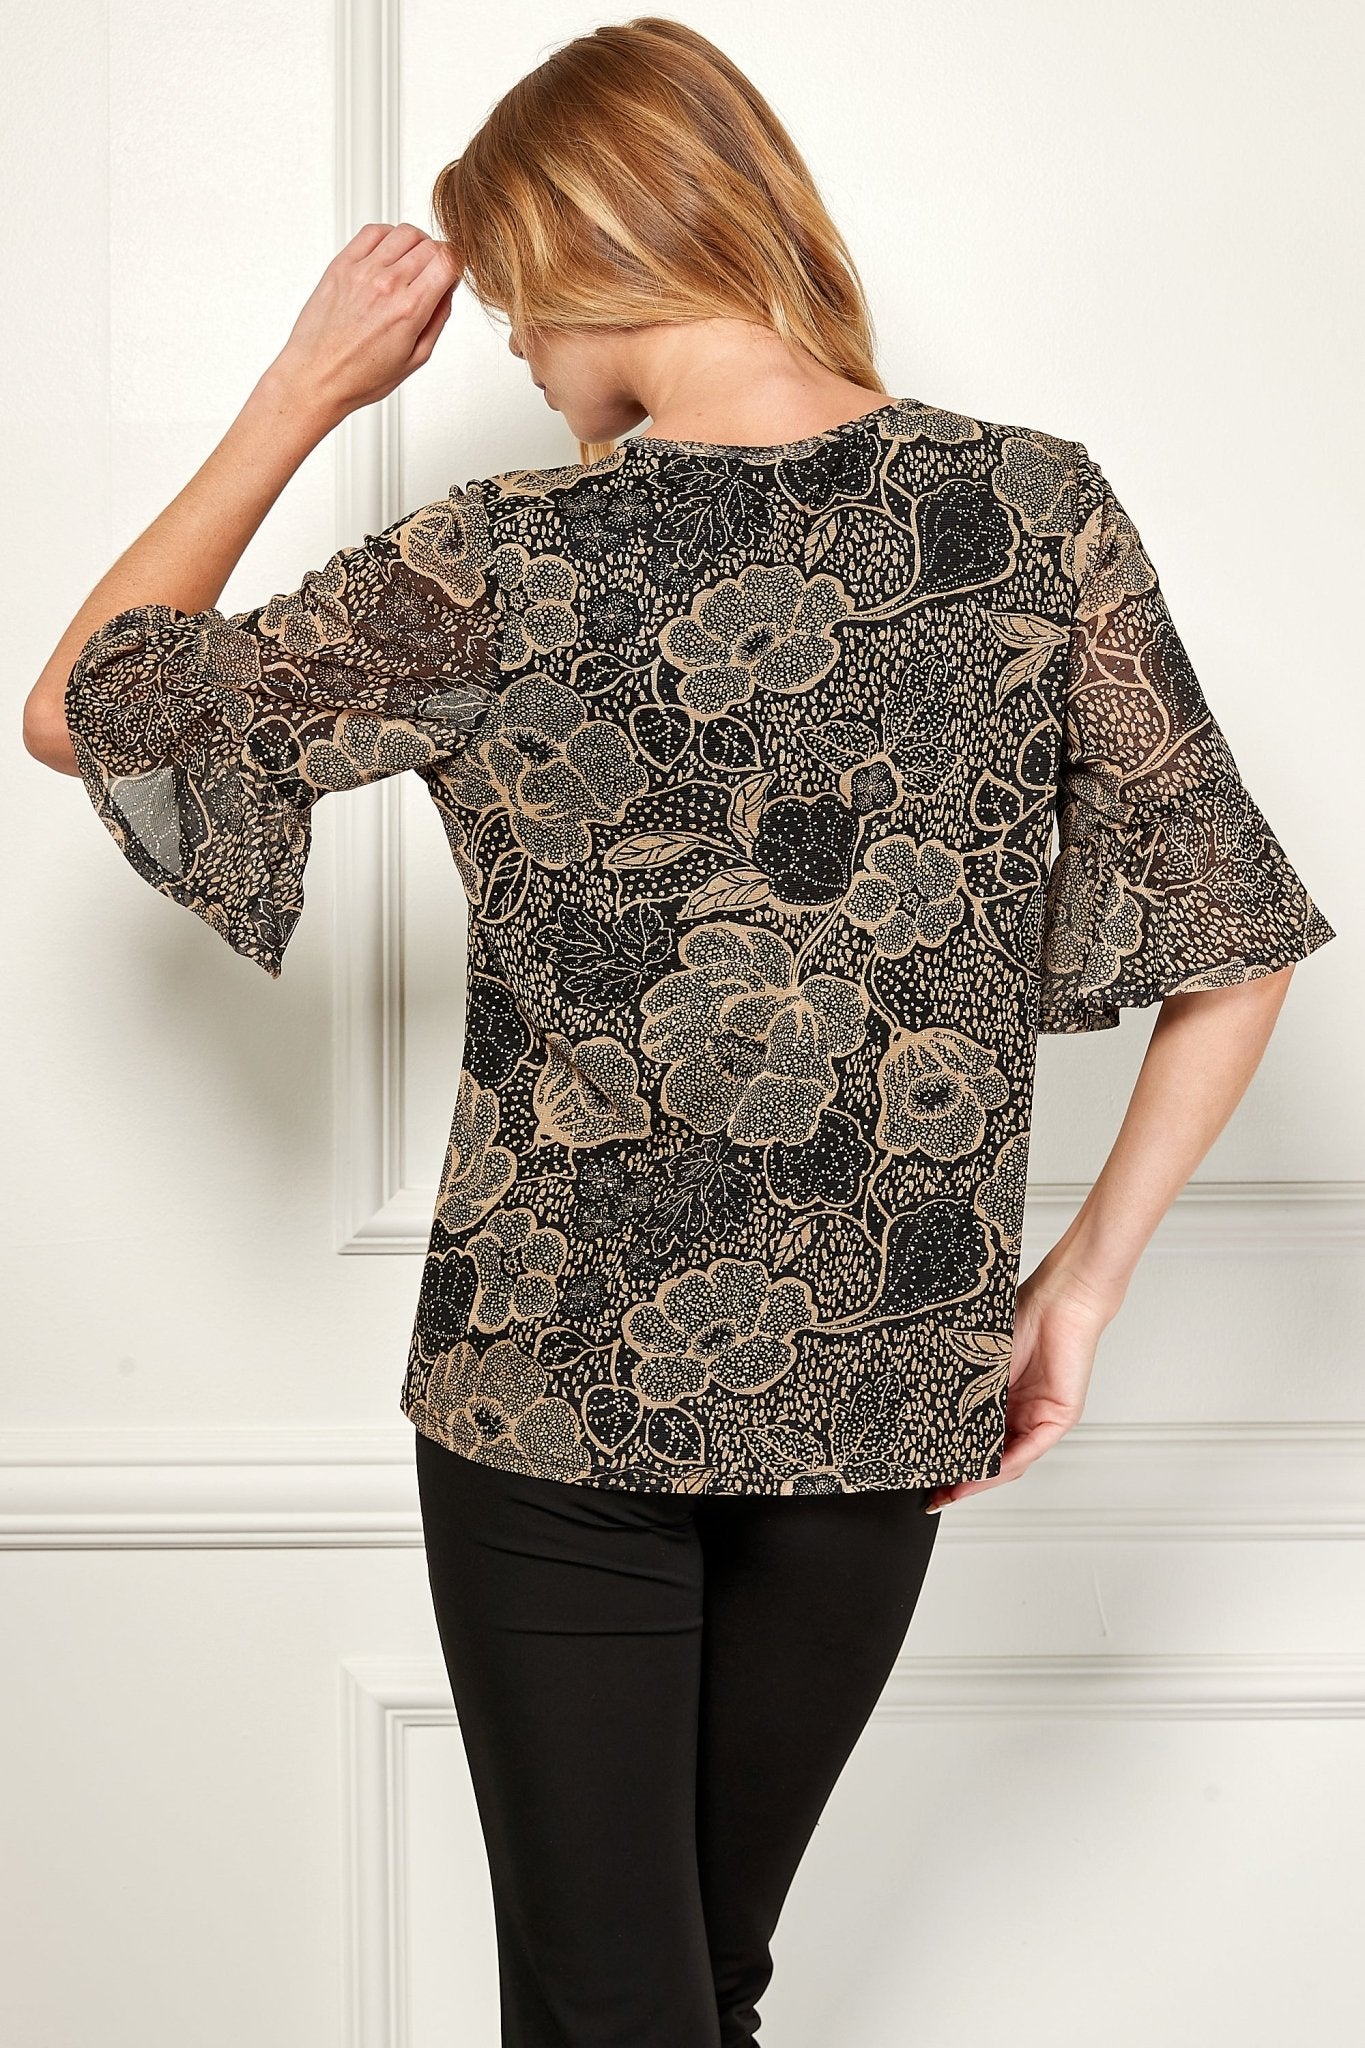 Sara Michelle Elbow Rfl Slv Lined Trapeze Blouse